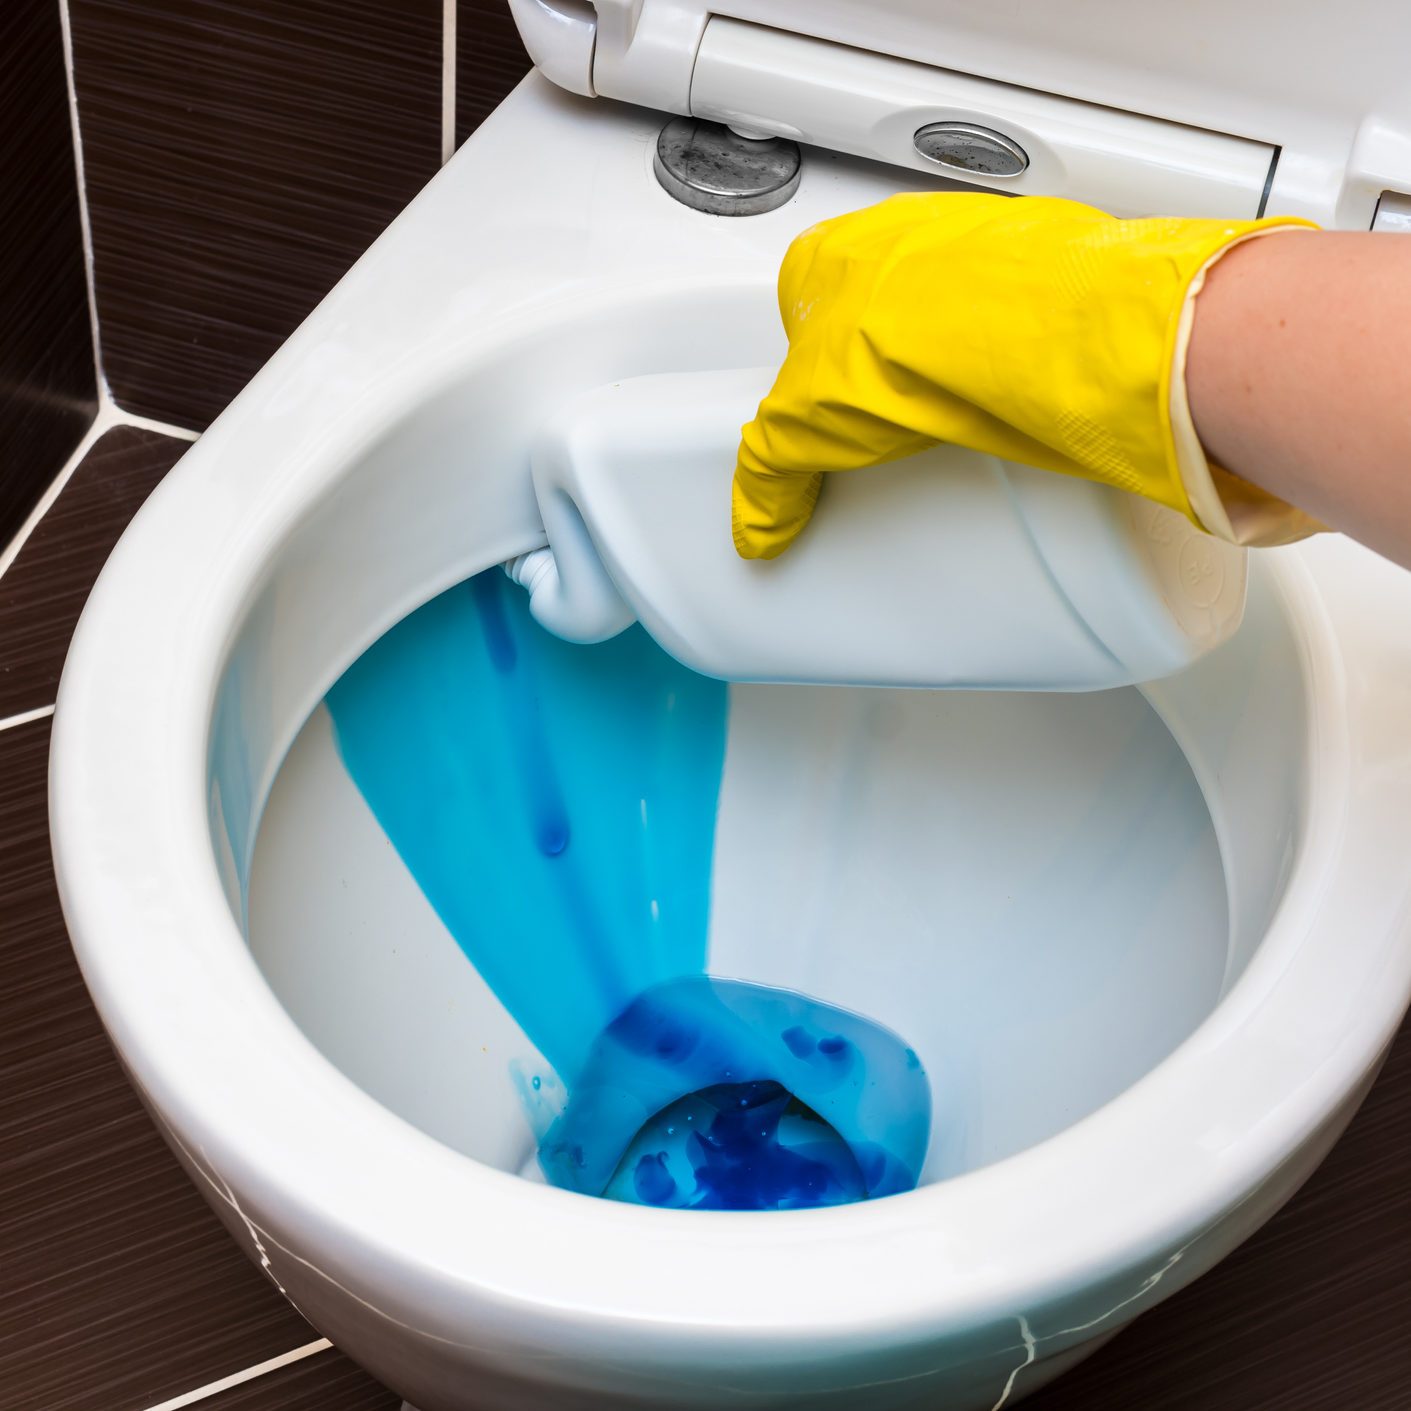 Woman is cleaning toilet bowl using detergent